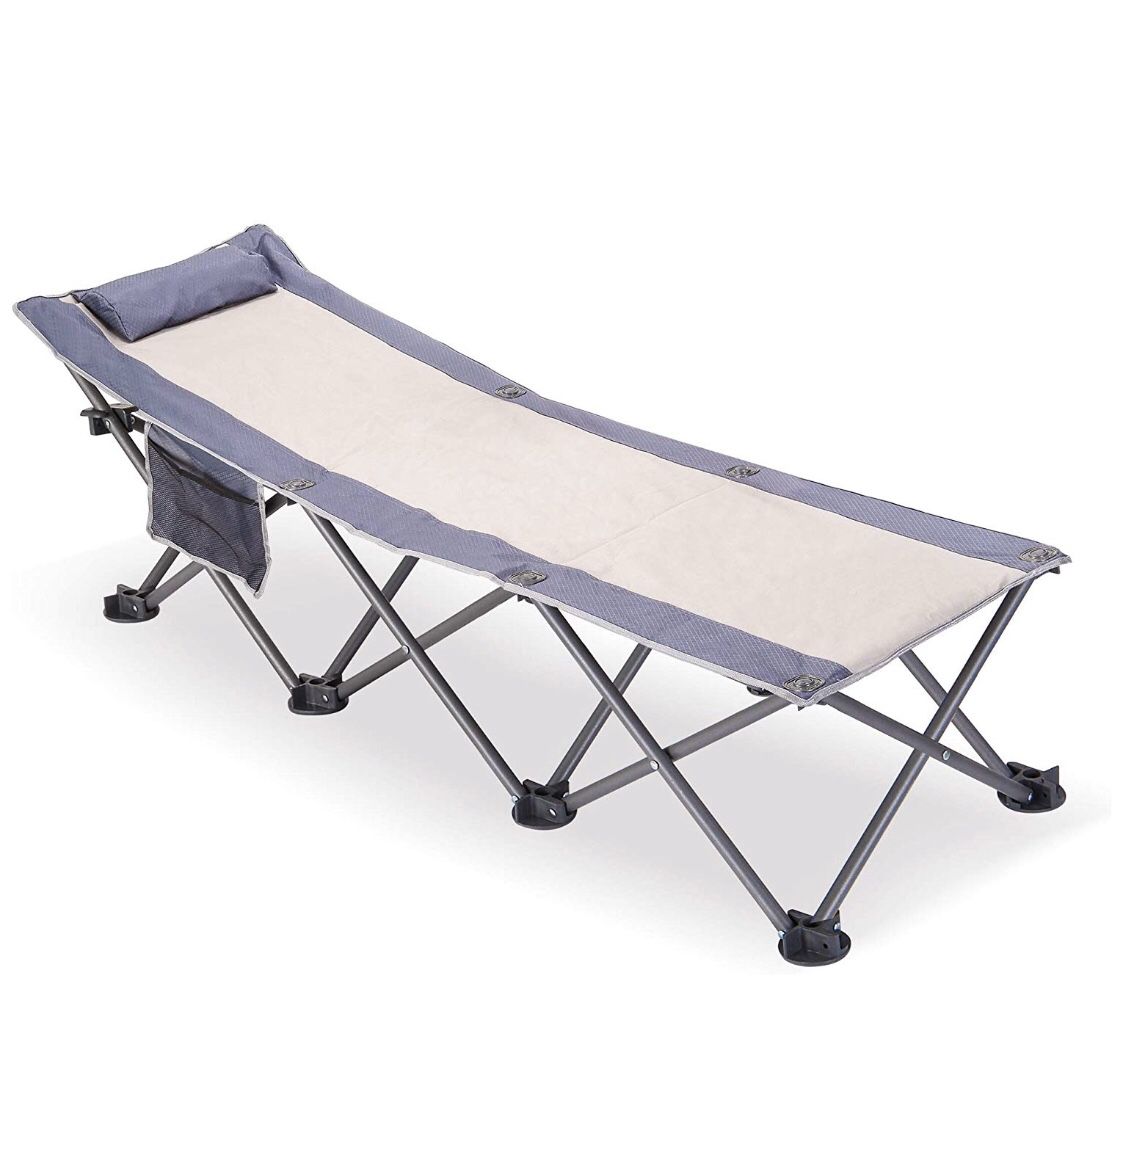 Folding Camping Cot with Side Storage Bag, Single Person Camping Bed Foldable Sleeping Bed Cots for Adults with Carry Bag and Pillow New in the box!